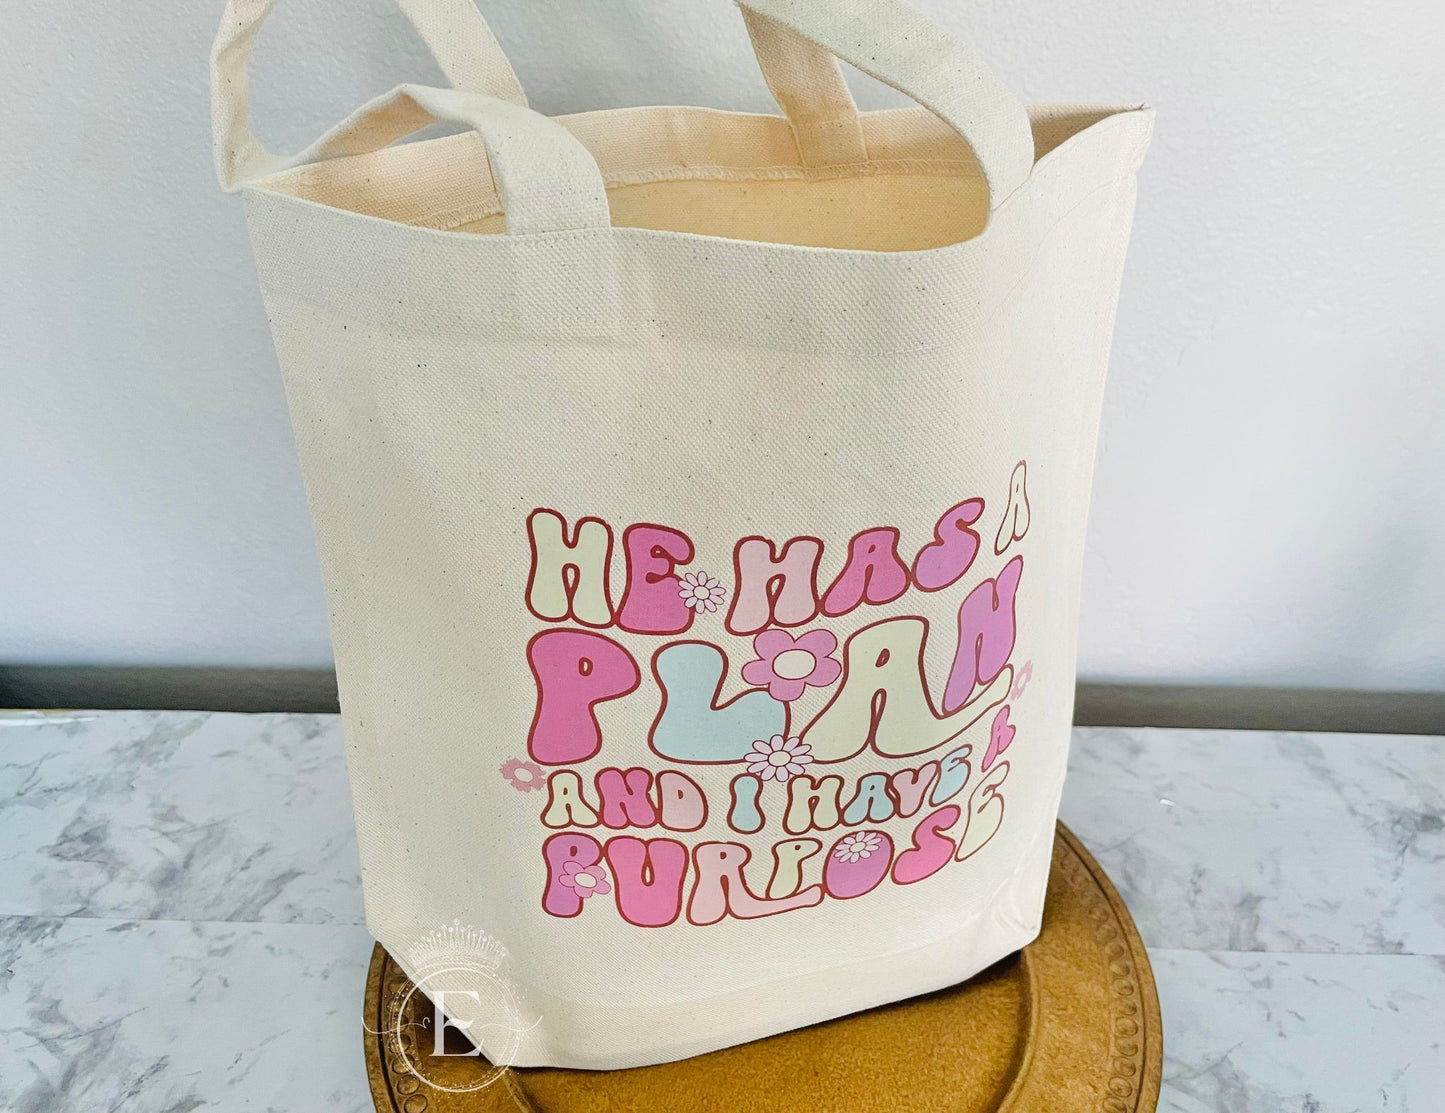 He Has A Plan And I Have A Purpose Tote Bag